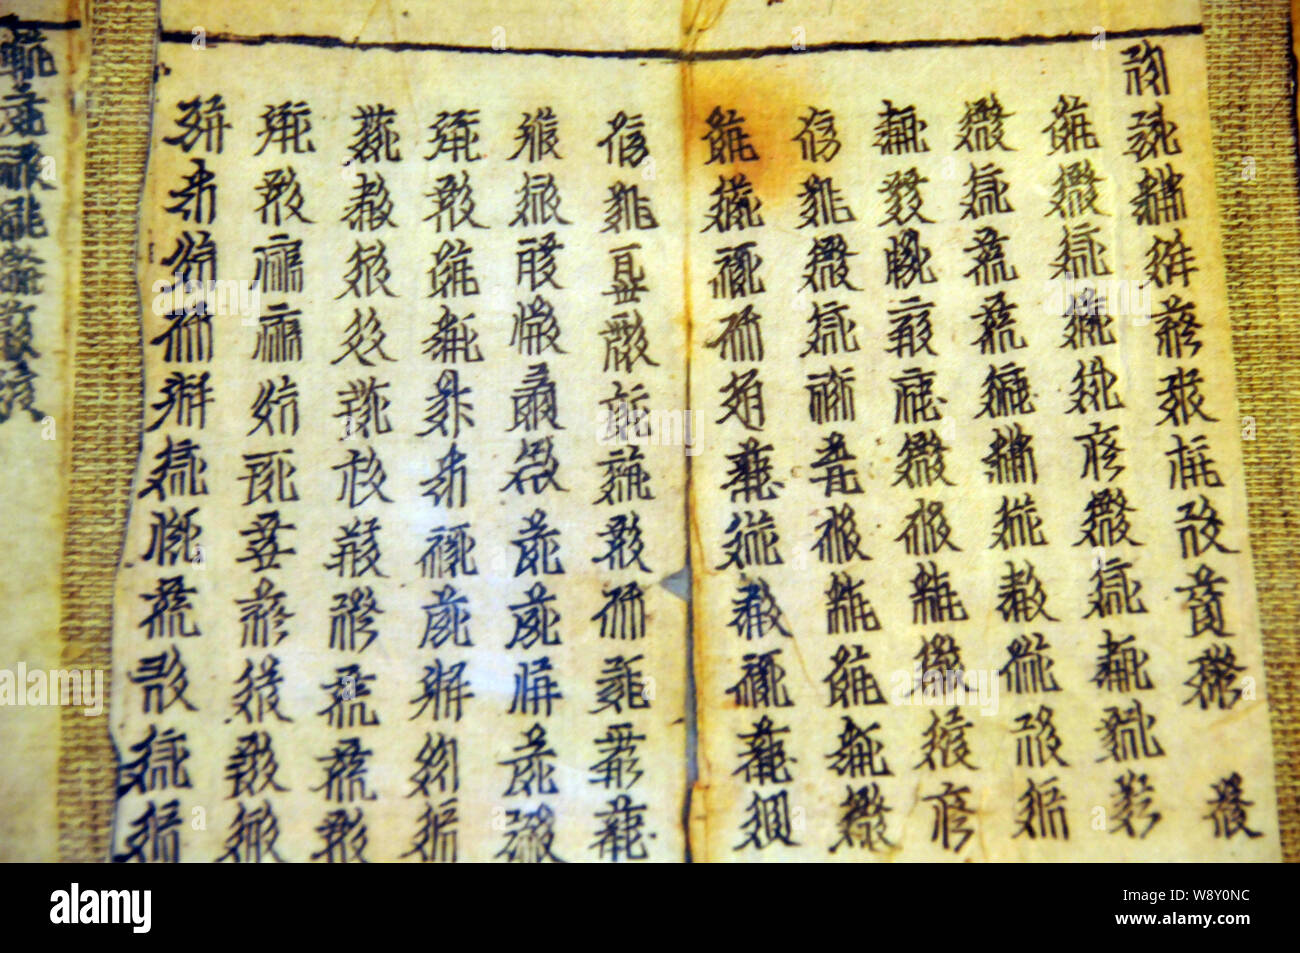 A script of Tangut characters is displayed at Wuwei Tangut Museum in Wuwei city, northwest China's Gansu province, 2 October 2013. Stock Photo